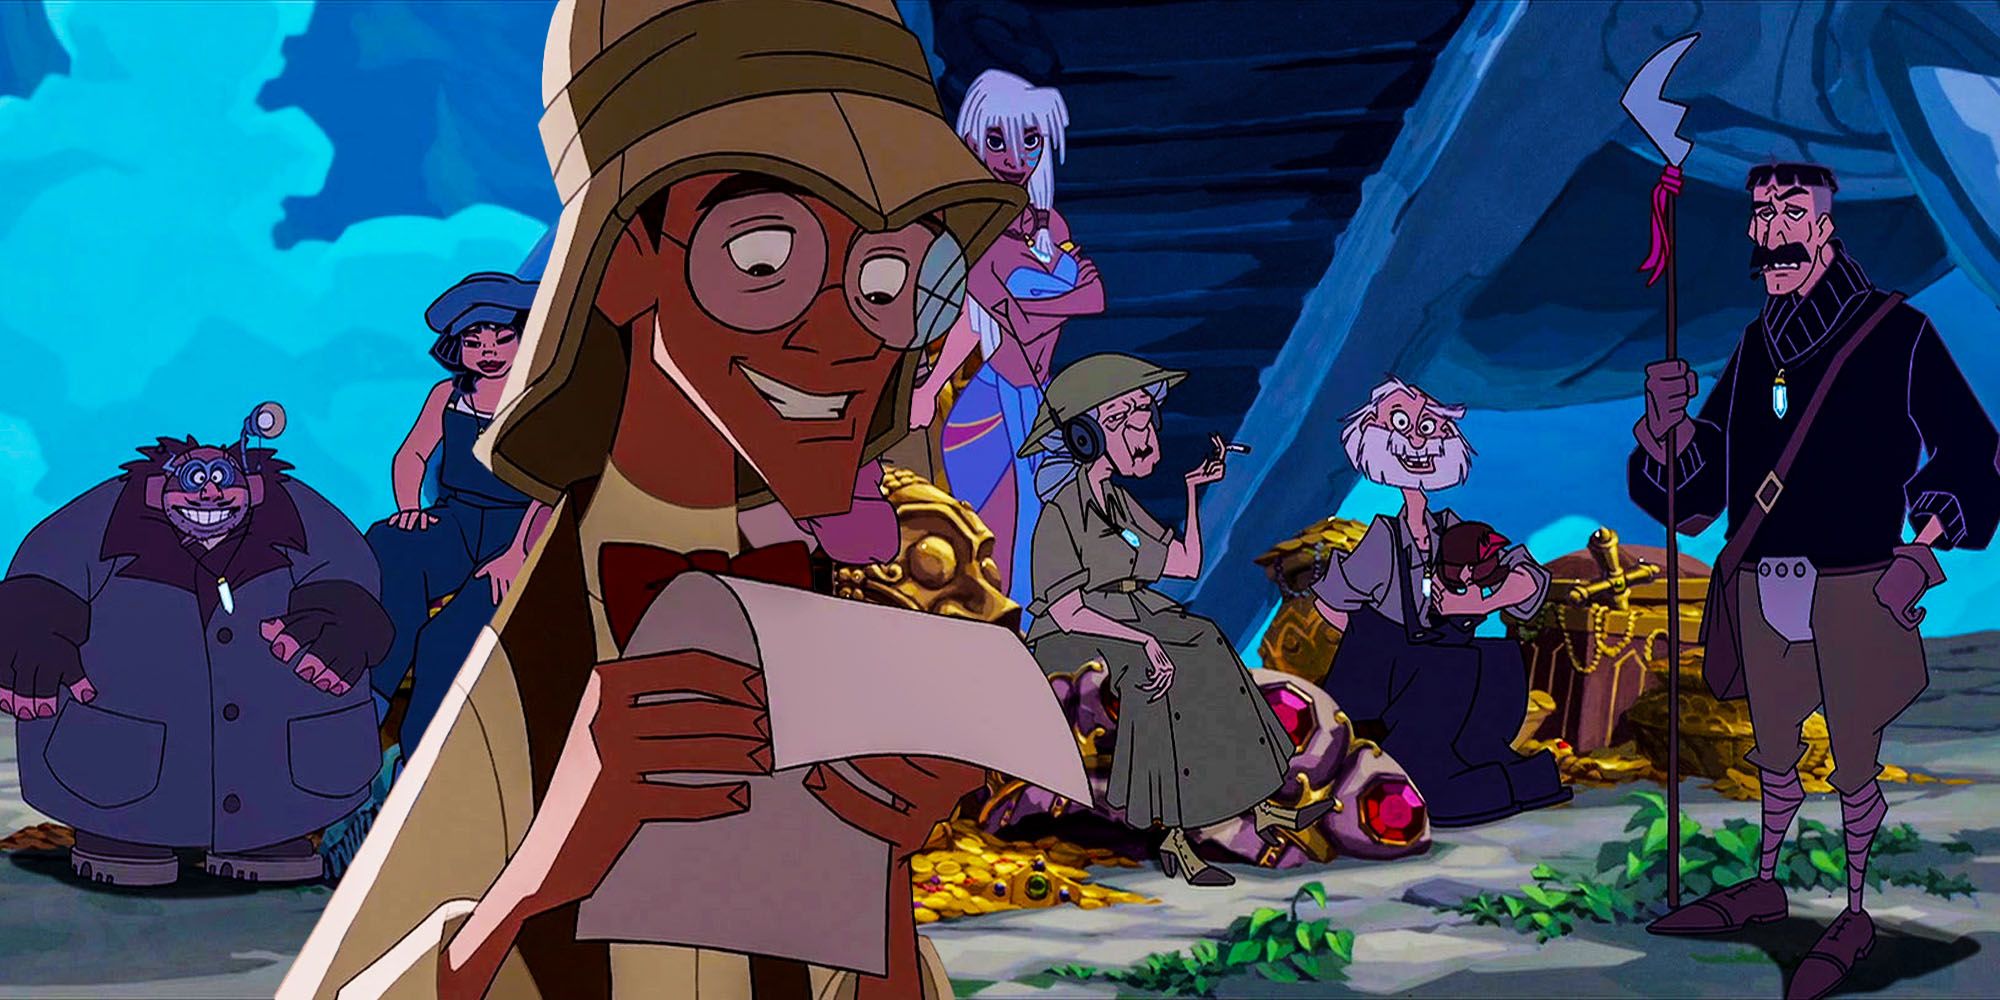 Milo reads a message with the crew of Atlantis the Lost Empire